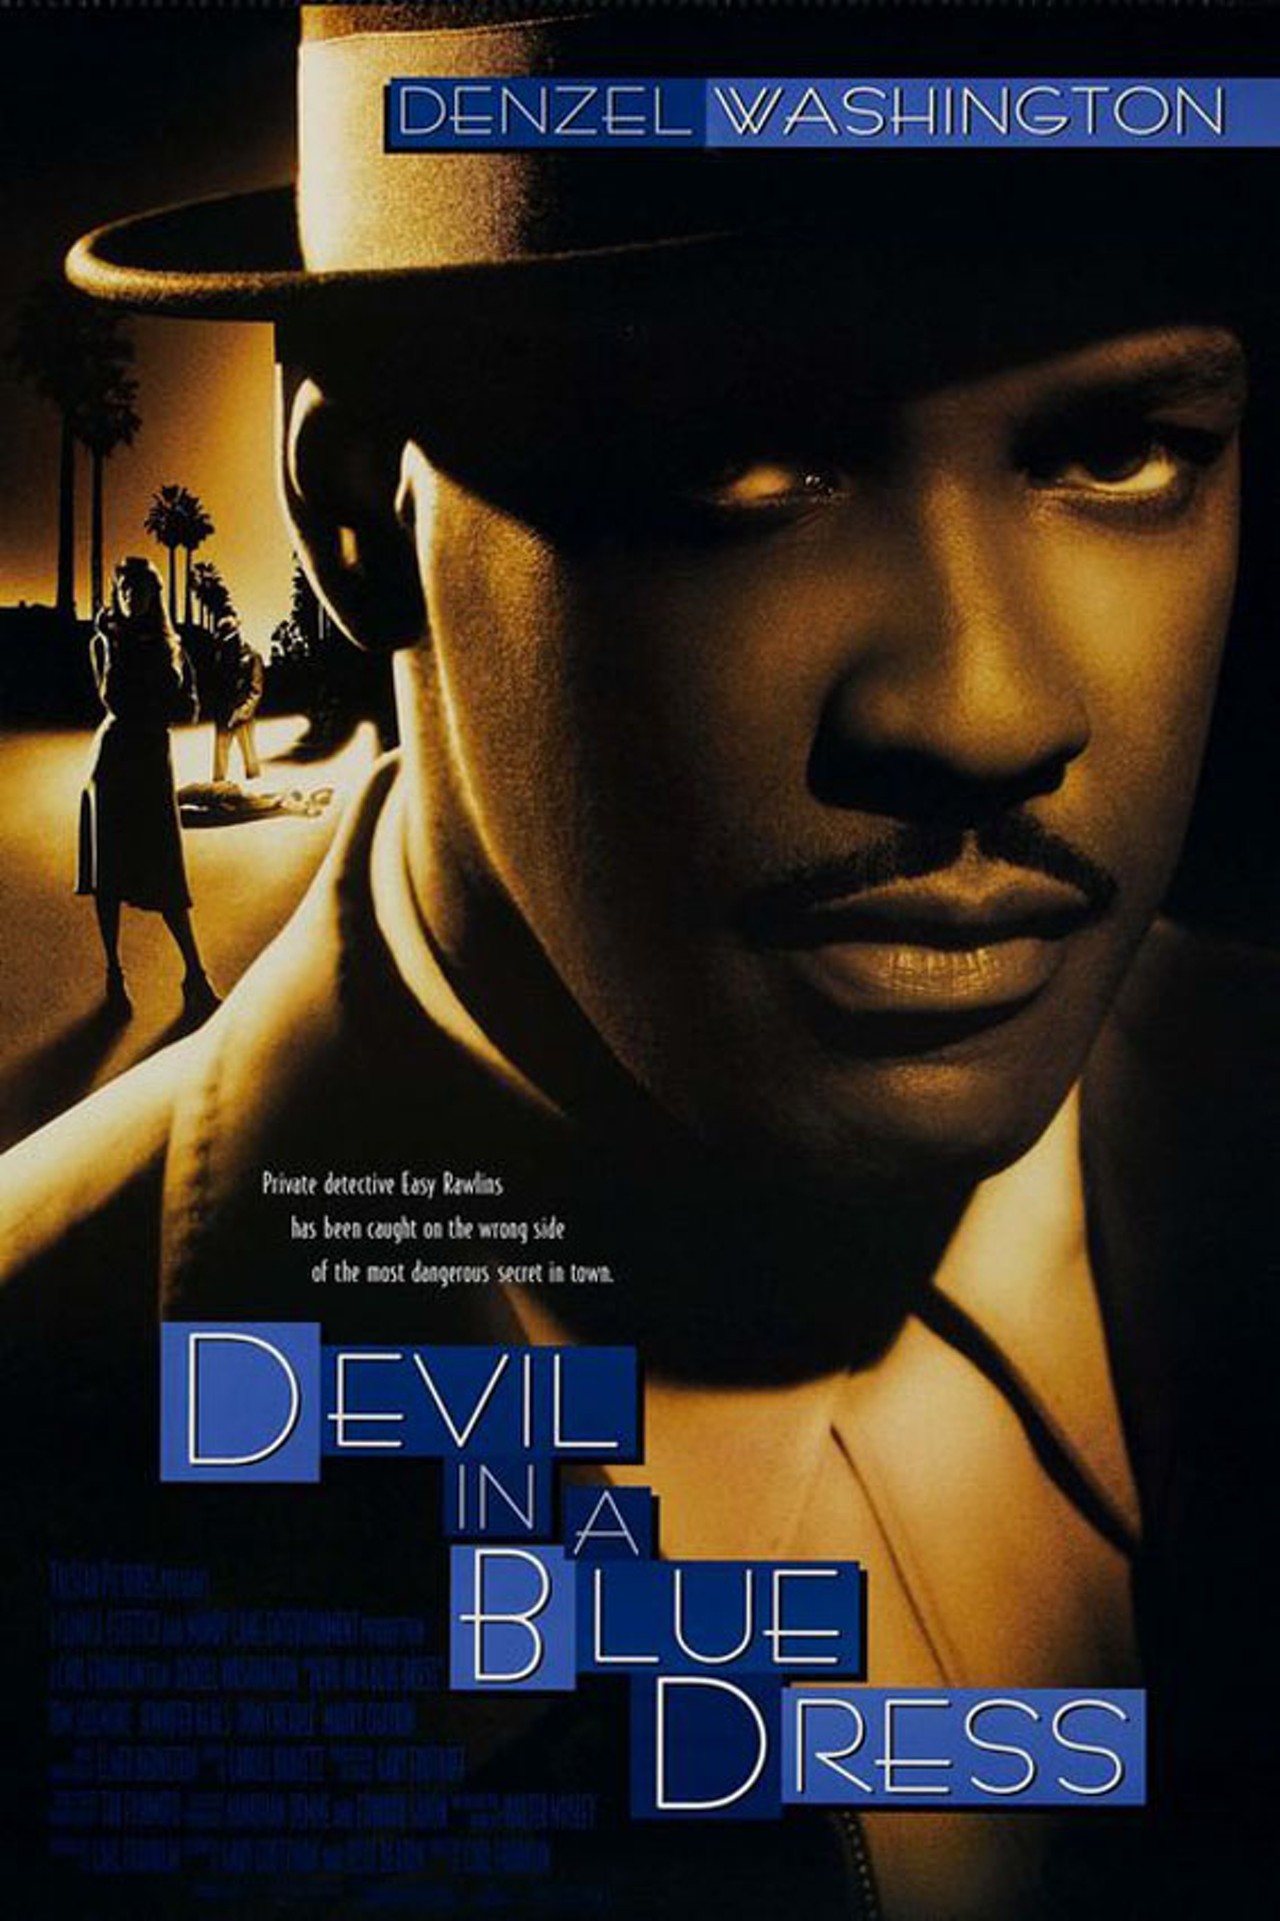 Devil in a Blue Dress (1995)
"In more ways than one, Devil is Chinatown with soul," wrote Village Voice film critic Georgia Brown in 1995. "Ezekiel "Easy" Rawlins (Denzel Washington" is a war vet from Houston who's come to L.A. following the dream. Easy found a job at Champion Aircraft and bought a fine little house with a yard and its own fruit trees. This house he loves like a woman, and, judging from the femmes fatale he meets in the course of Devil, it's less trouble.